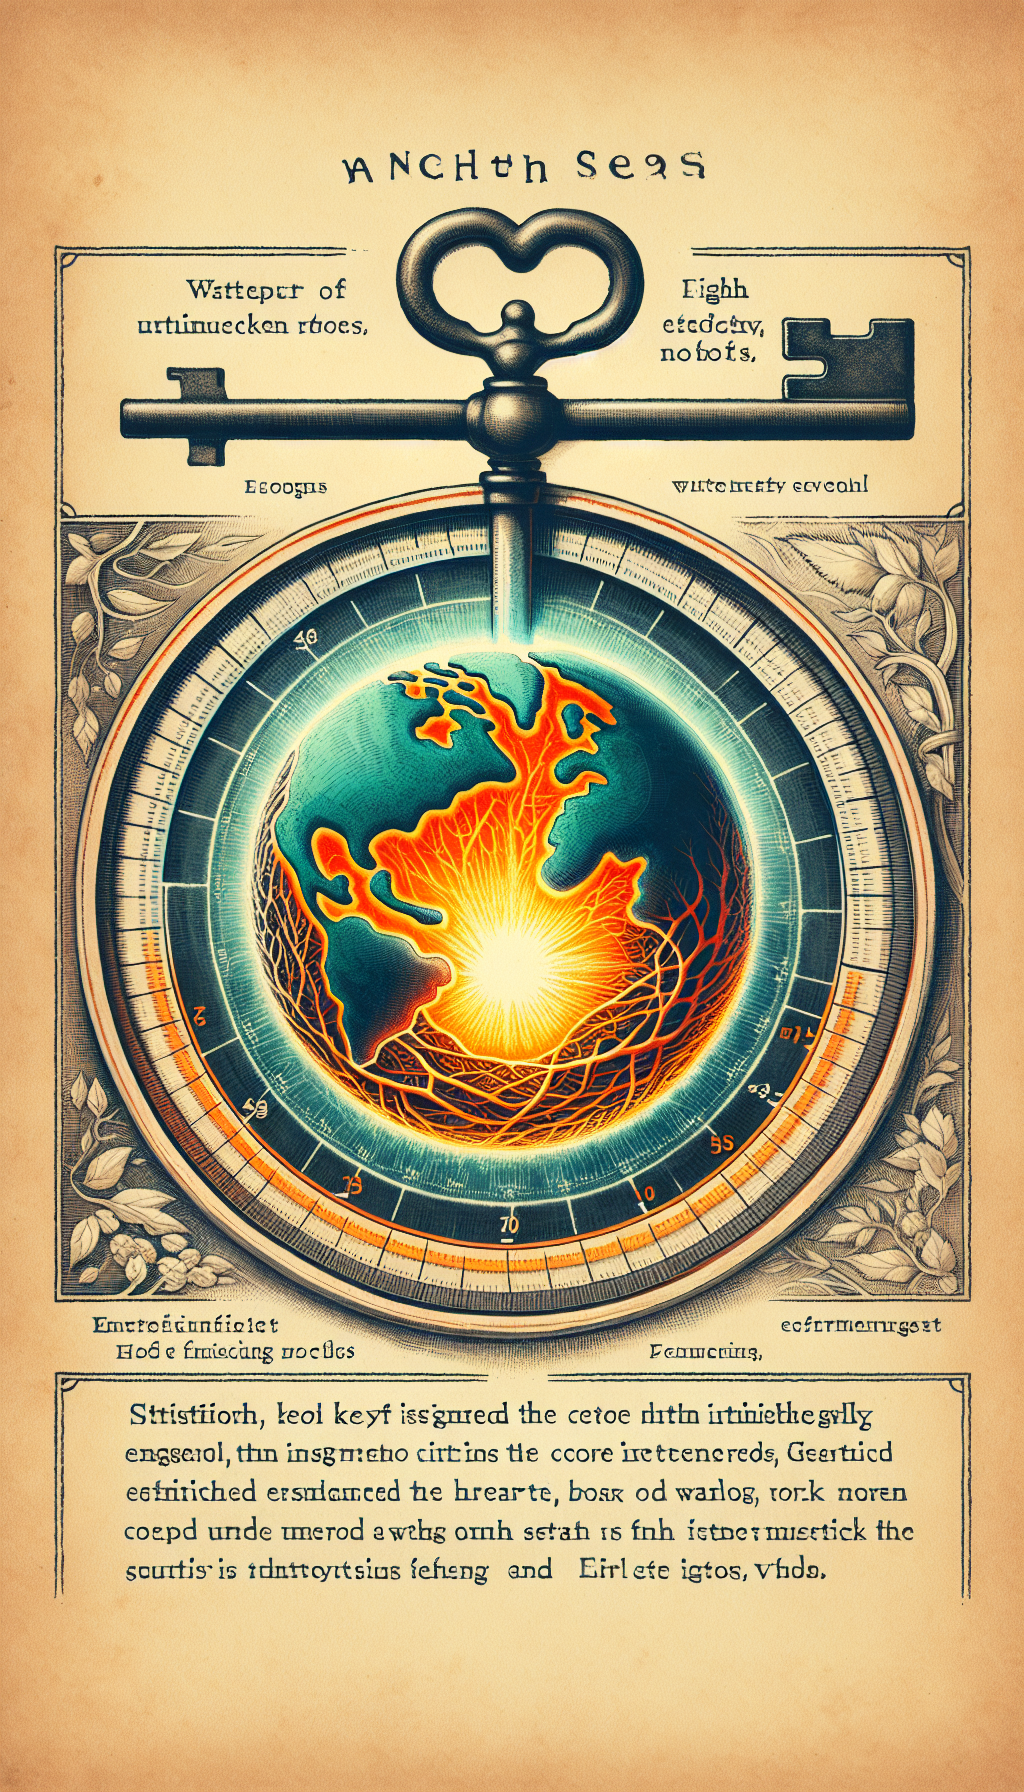 An illustration showcases a cross-section of a stylized Earth, its core glowing warmly like a hearth. Above the surface, a vintage key is turning within a lock made of interwoven roots, symbolizing the 'unlocking' process. The Earth is encircled by a simple, elegant gauge indicating high efficiency levels, reflecting the 'earth stove value', melded in watercolor and line art styles.